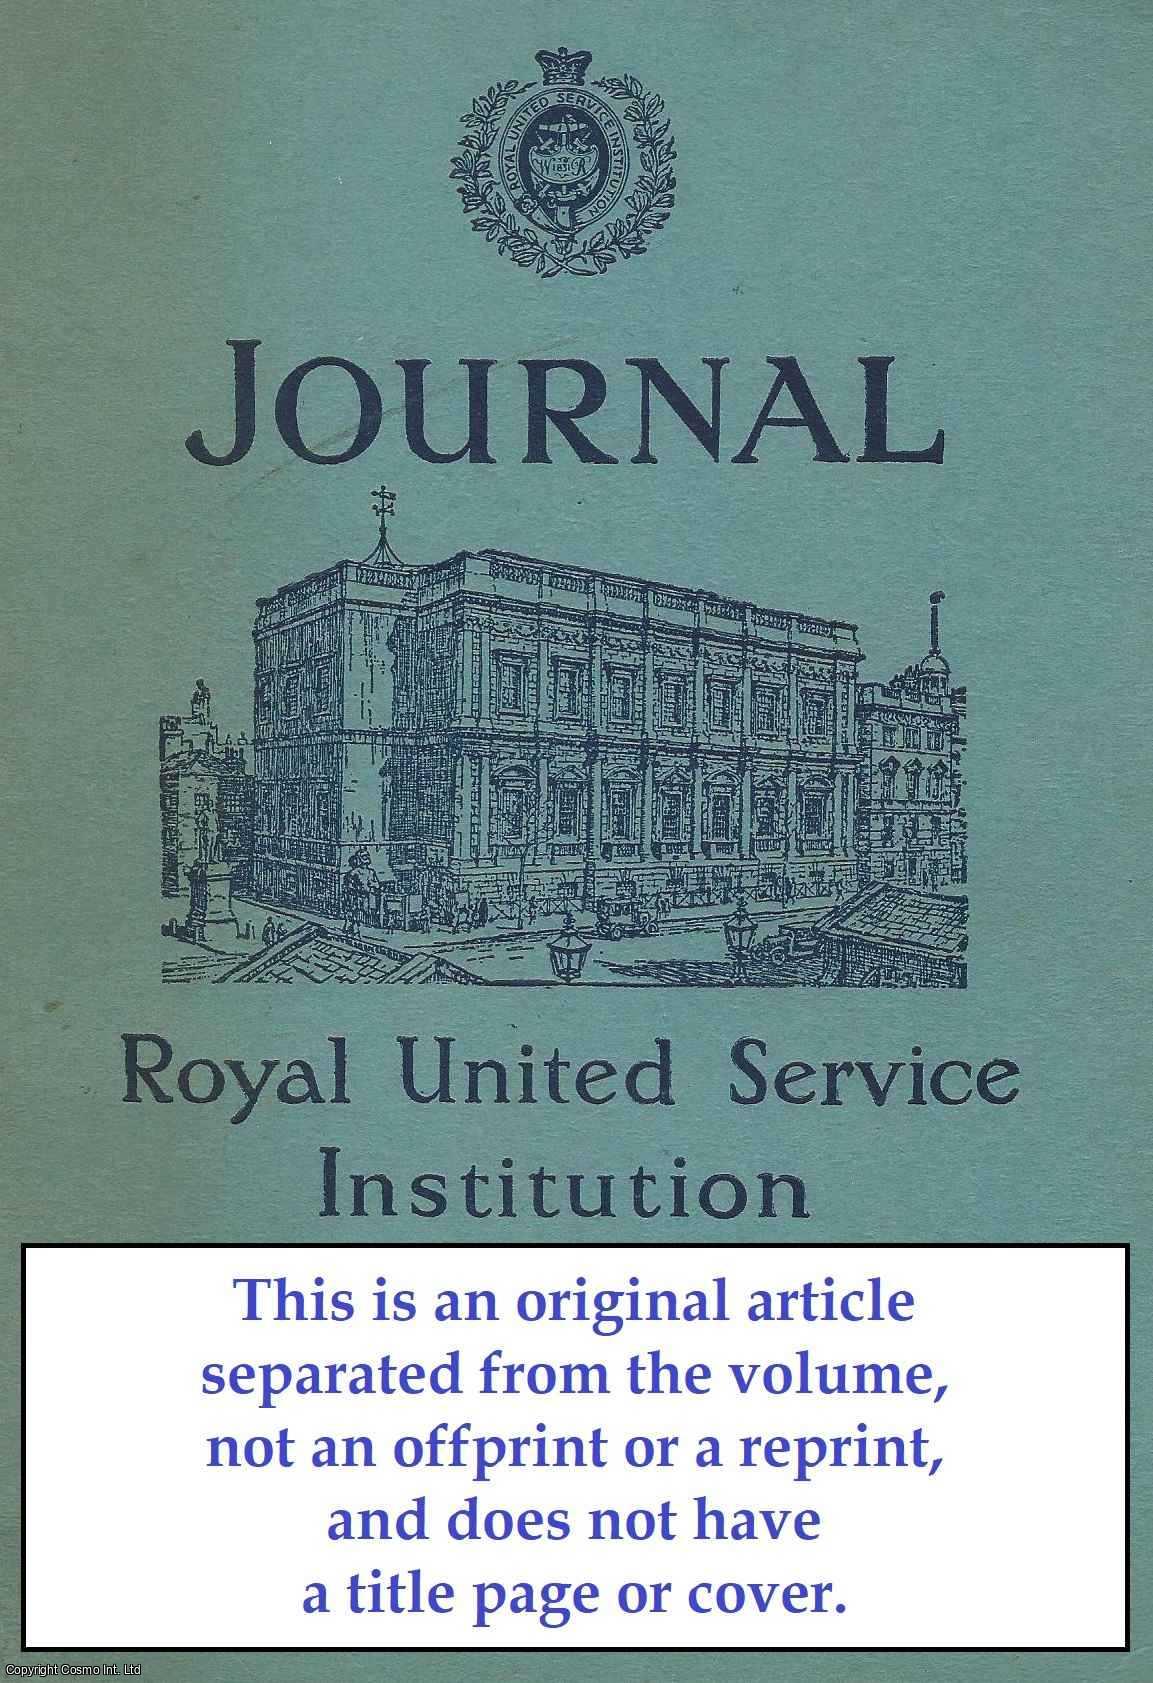 J. K. - The Campaign in Sicily, 1943. An original article from Journal of The Royal United Service Institution, 1956.